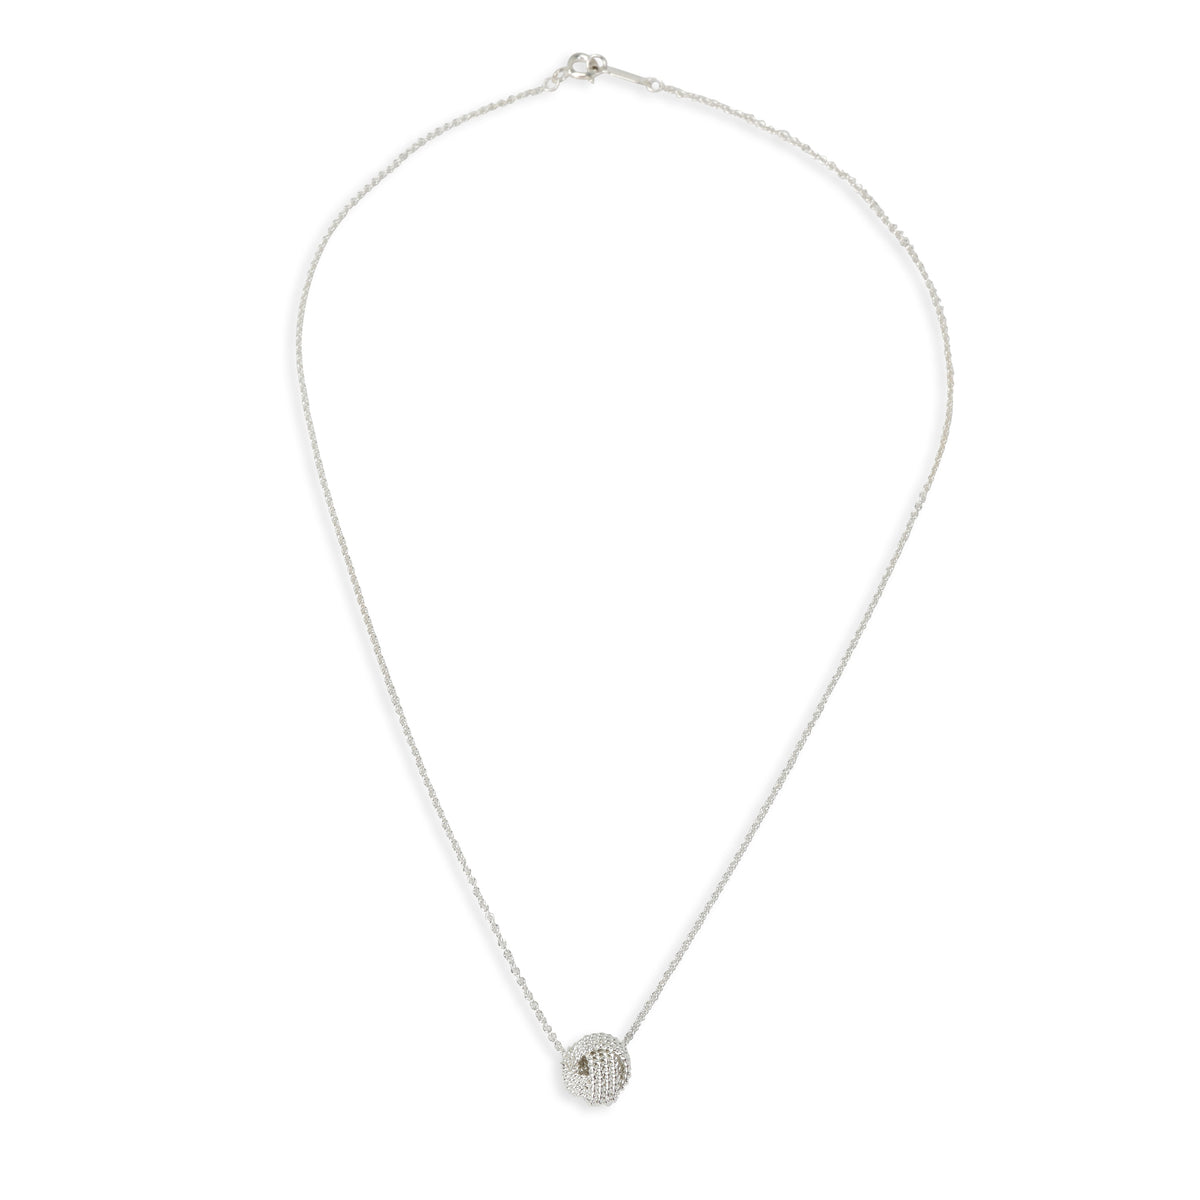 Tiffany & Co. Somerset Knot Necklace in  Sterling Silver